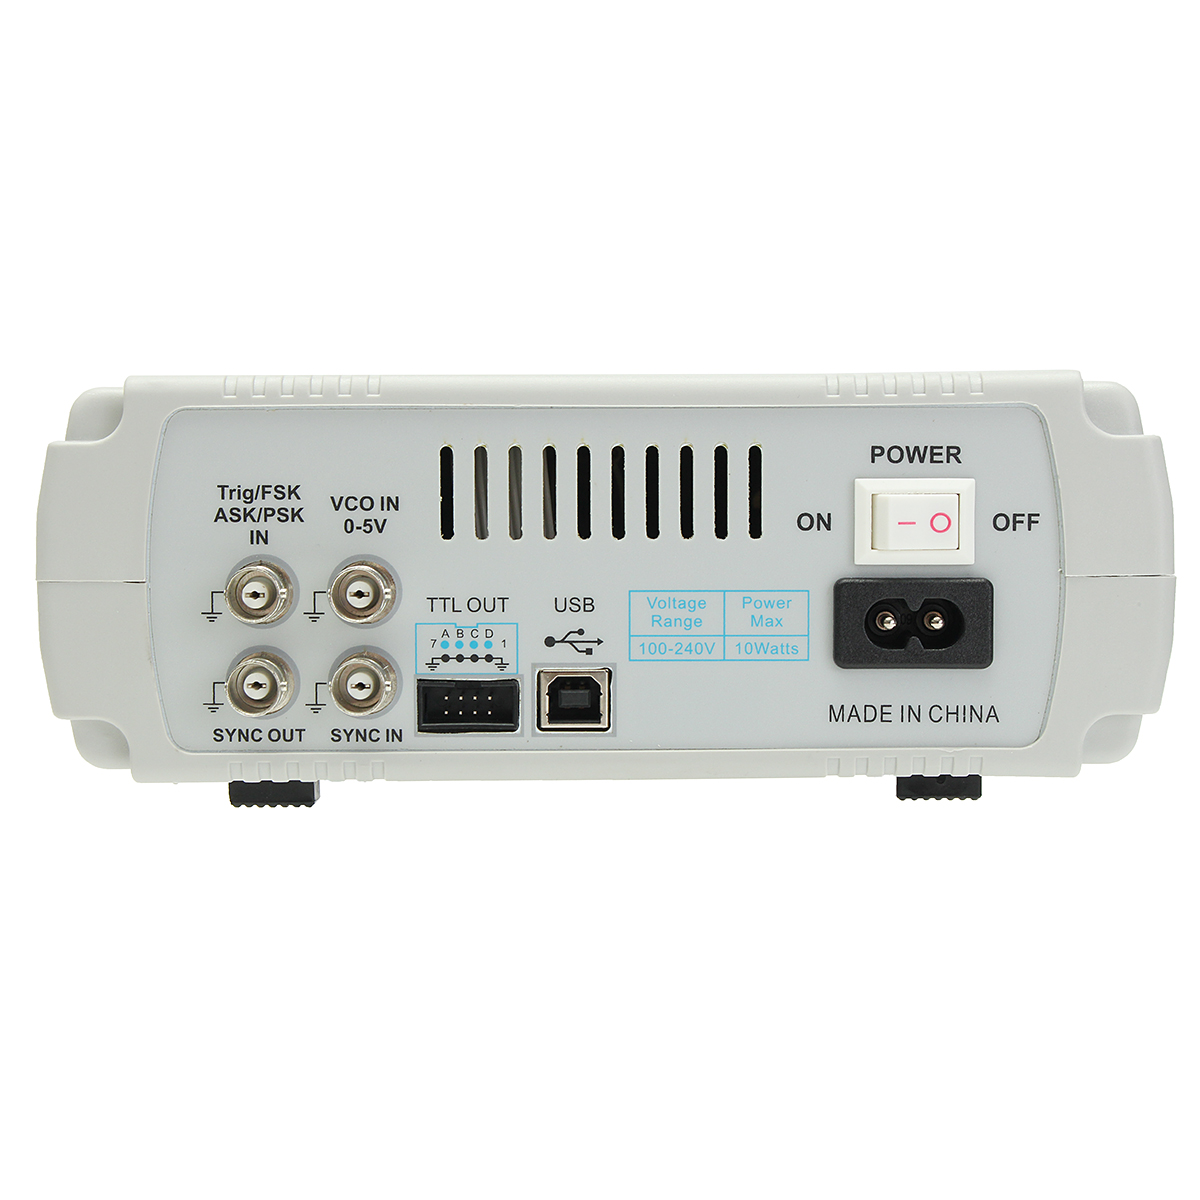 FY6600 Digital 12-60MHz Dual Channel DDS Function Arbitrary Waveform Signal Generator Frequency Meter 15